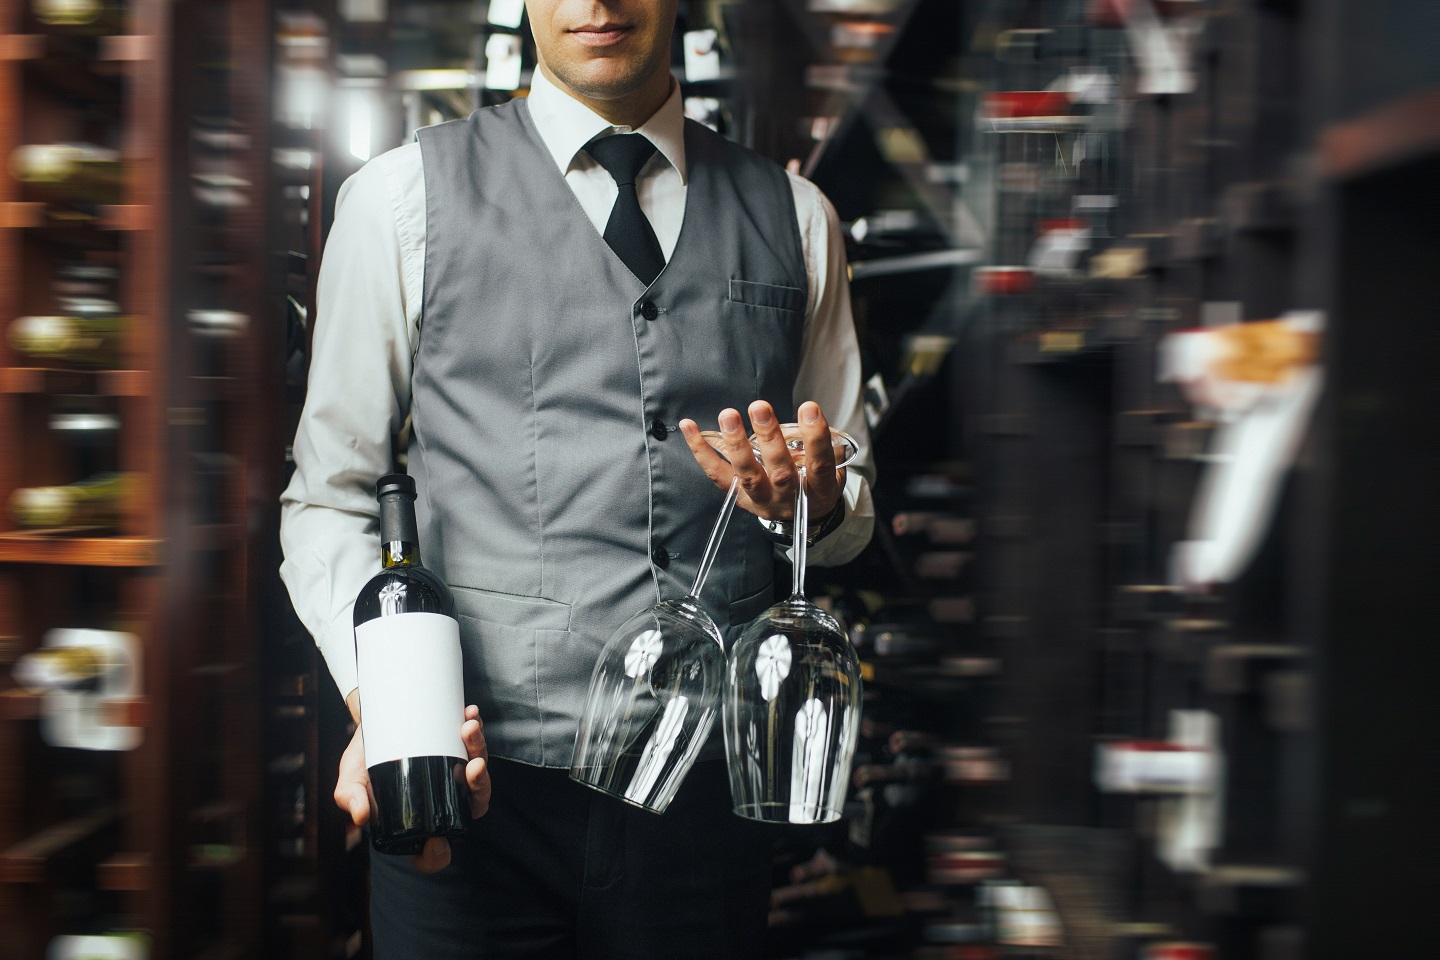 What are the requirements to become a sommelier?